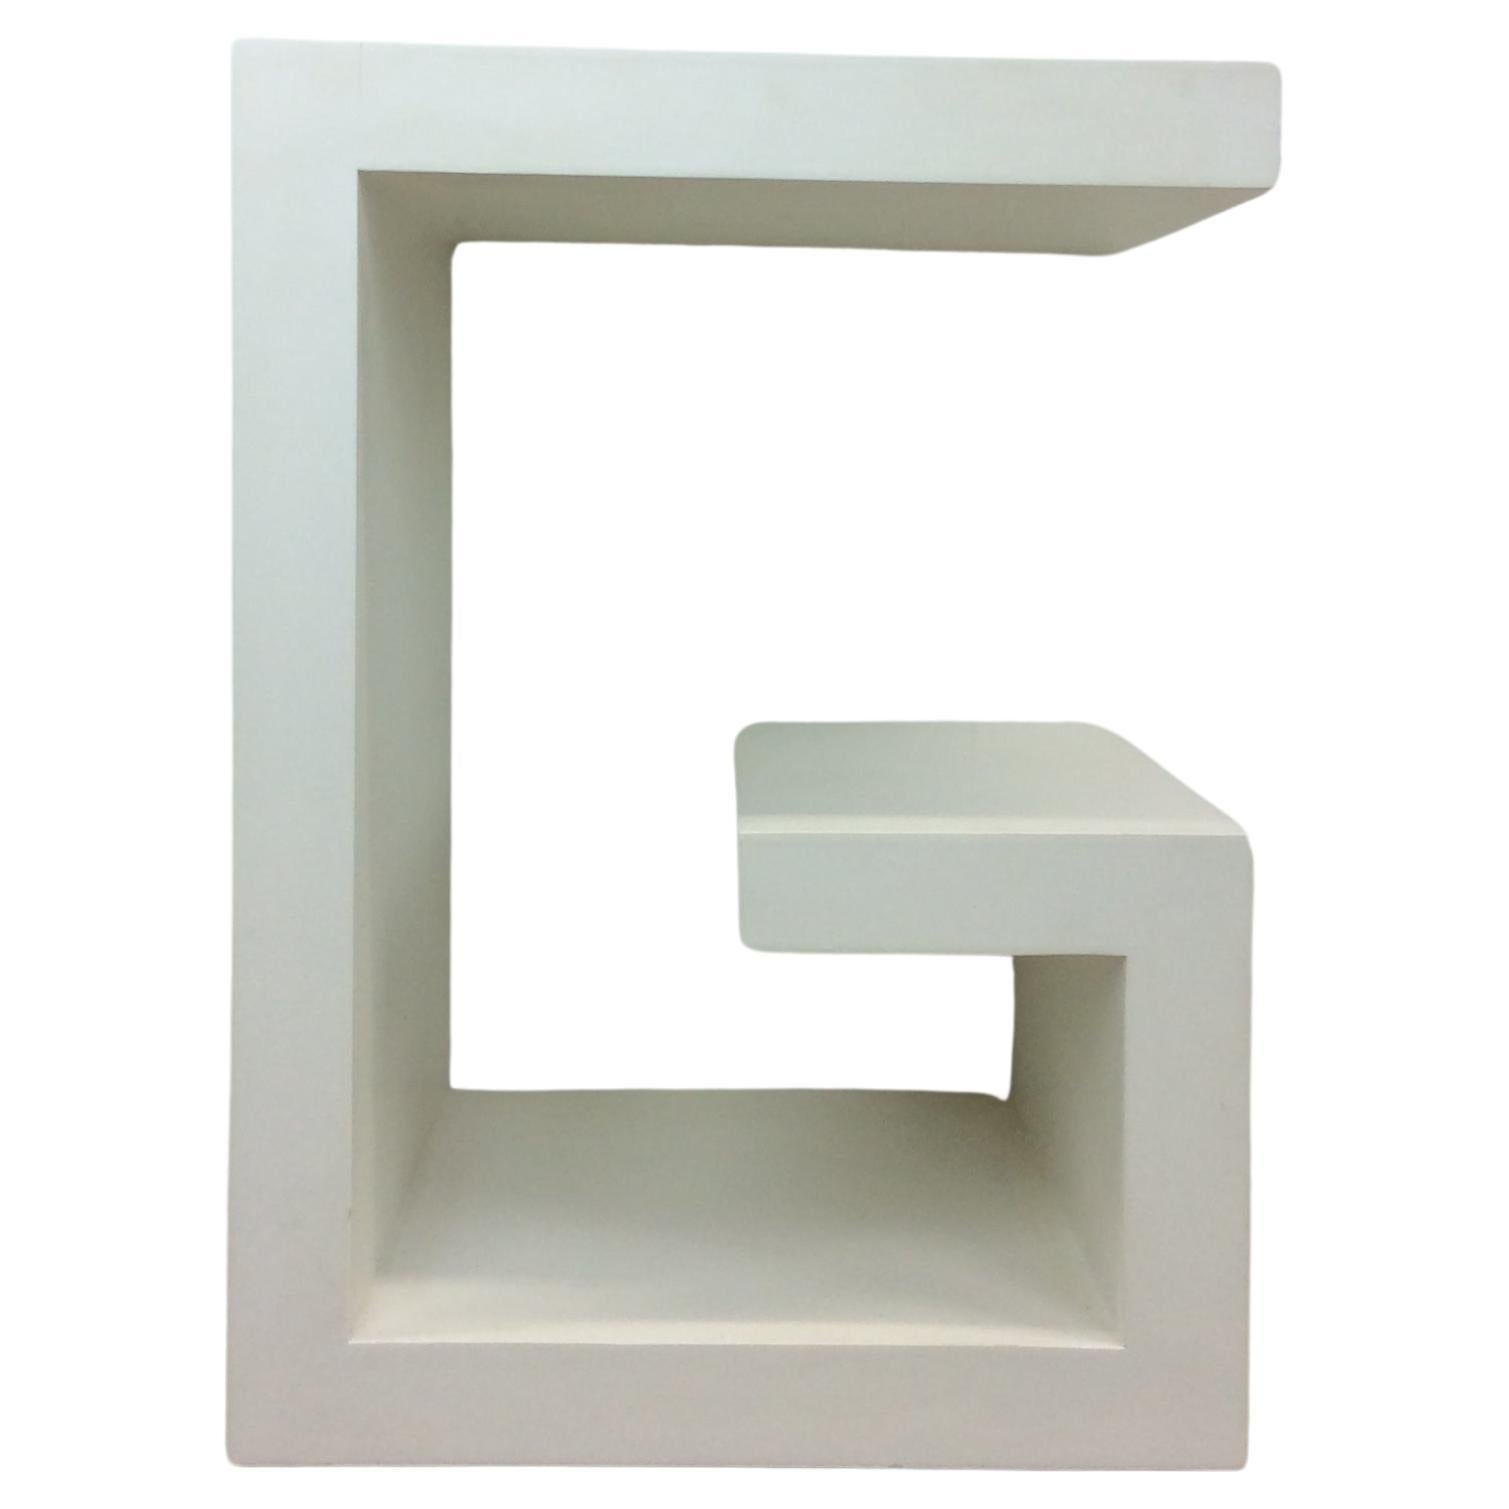 Postmodern G Shaped Decorative Pedestal End Table in White Lacquer